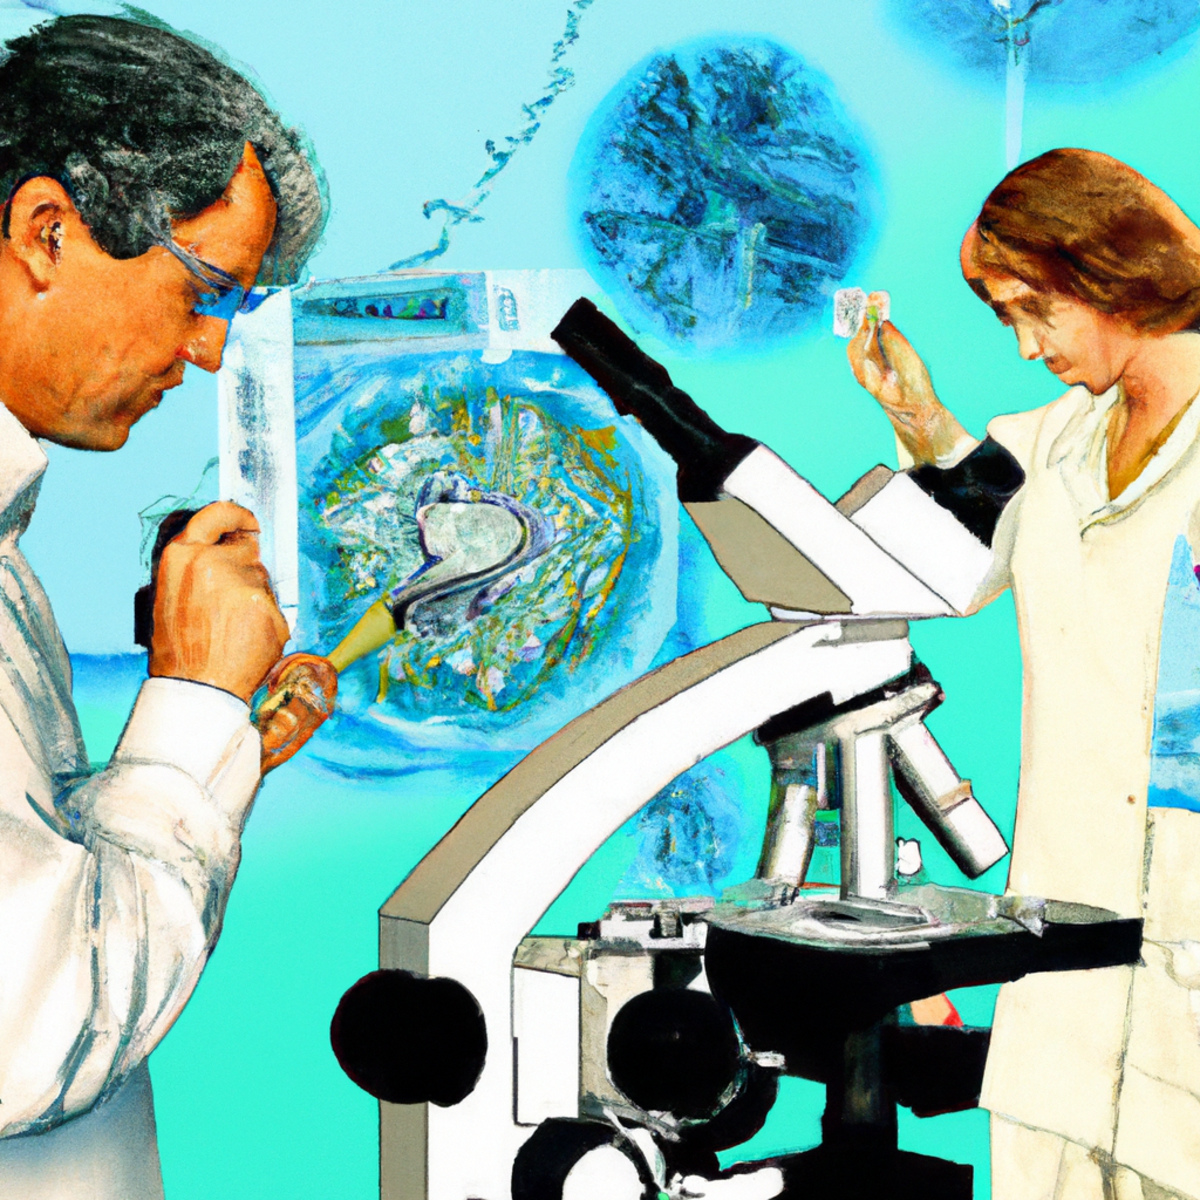 Scientists conducting groundbreaking research on gallbladder neuroendocrine tumor in a laboratory, using a microscope and scientific instruments.